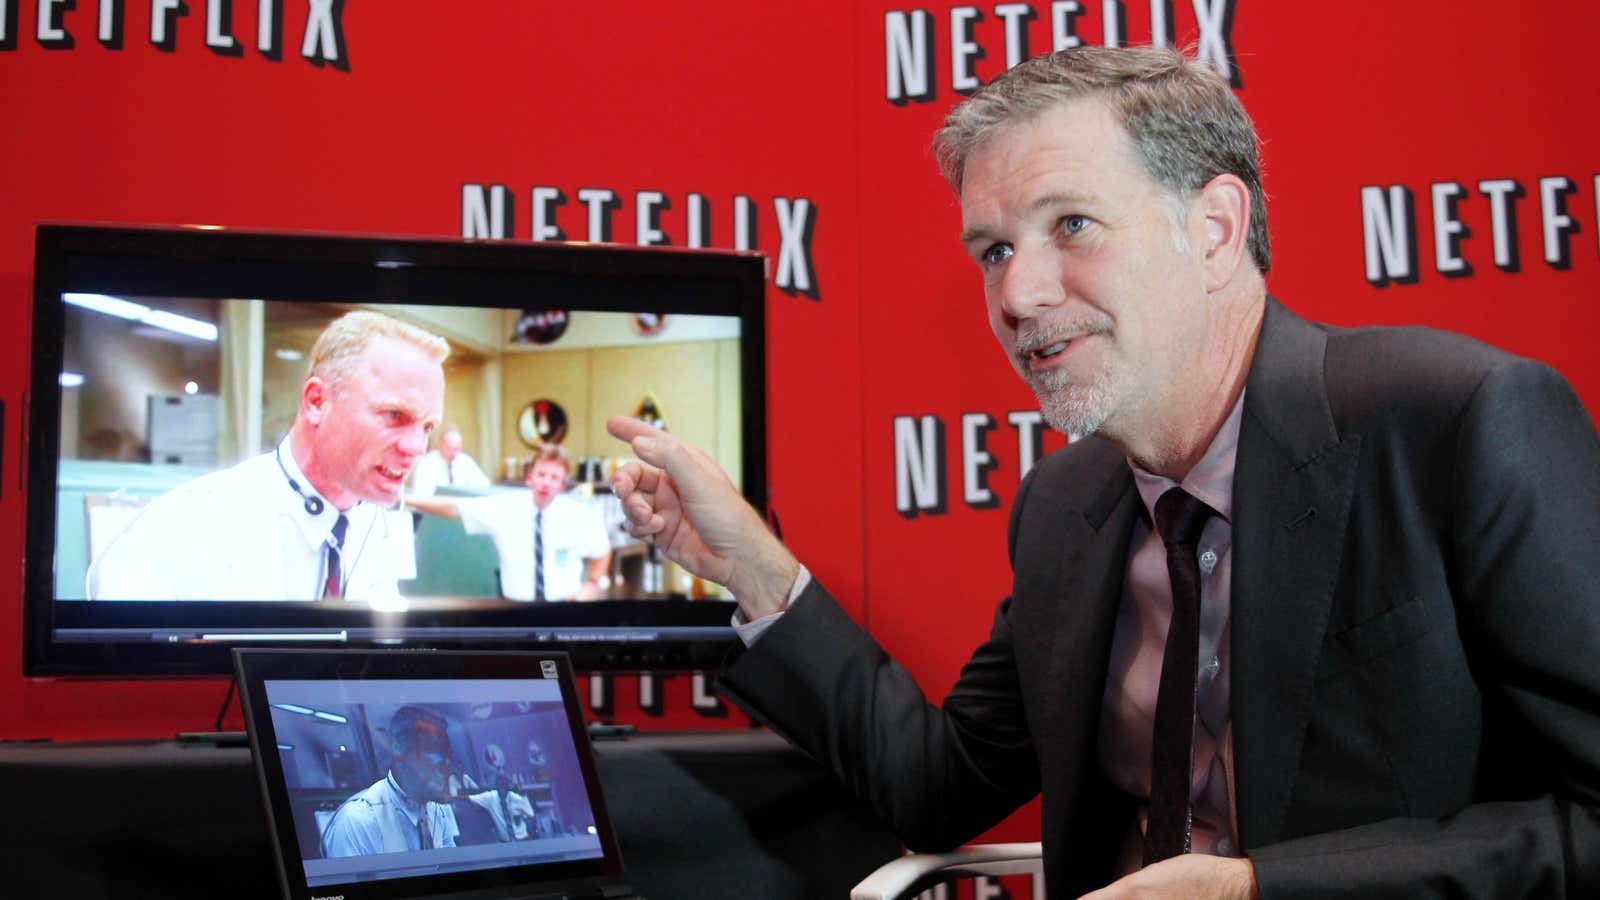 Good start to 2014 for Netflix CEO Reed Hastings.